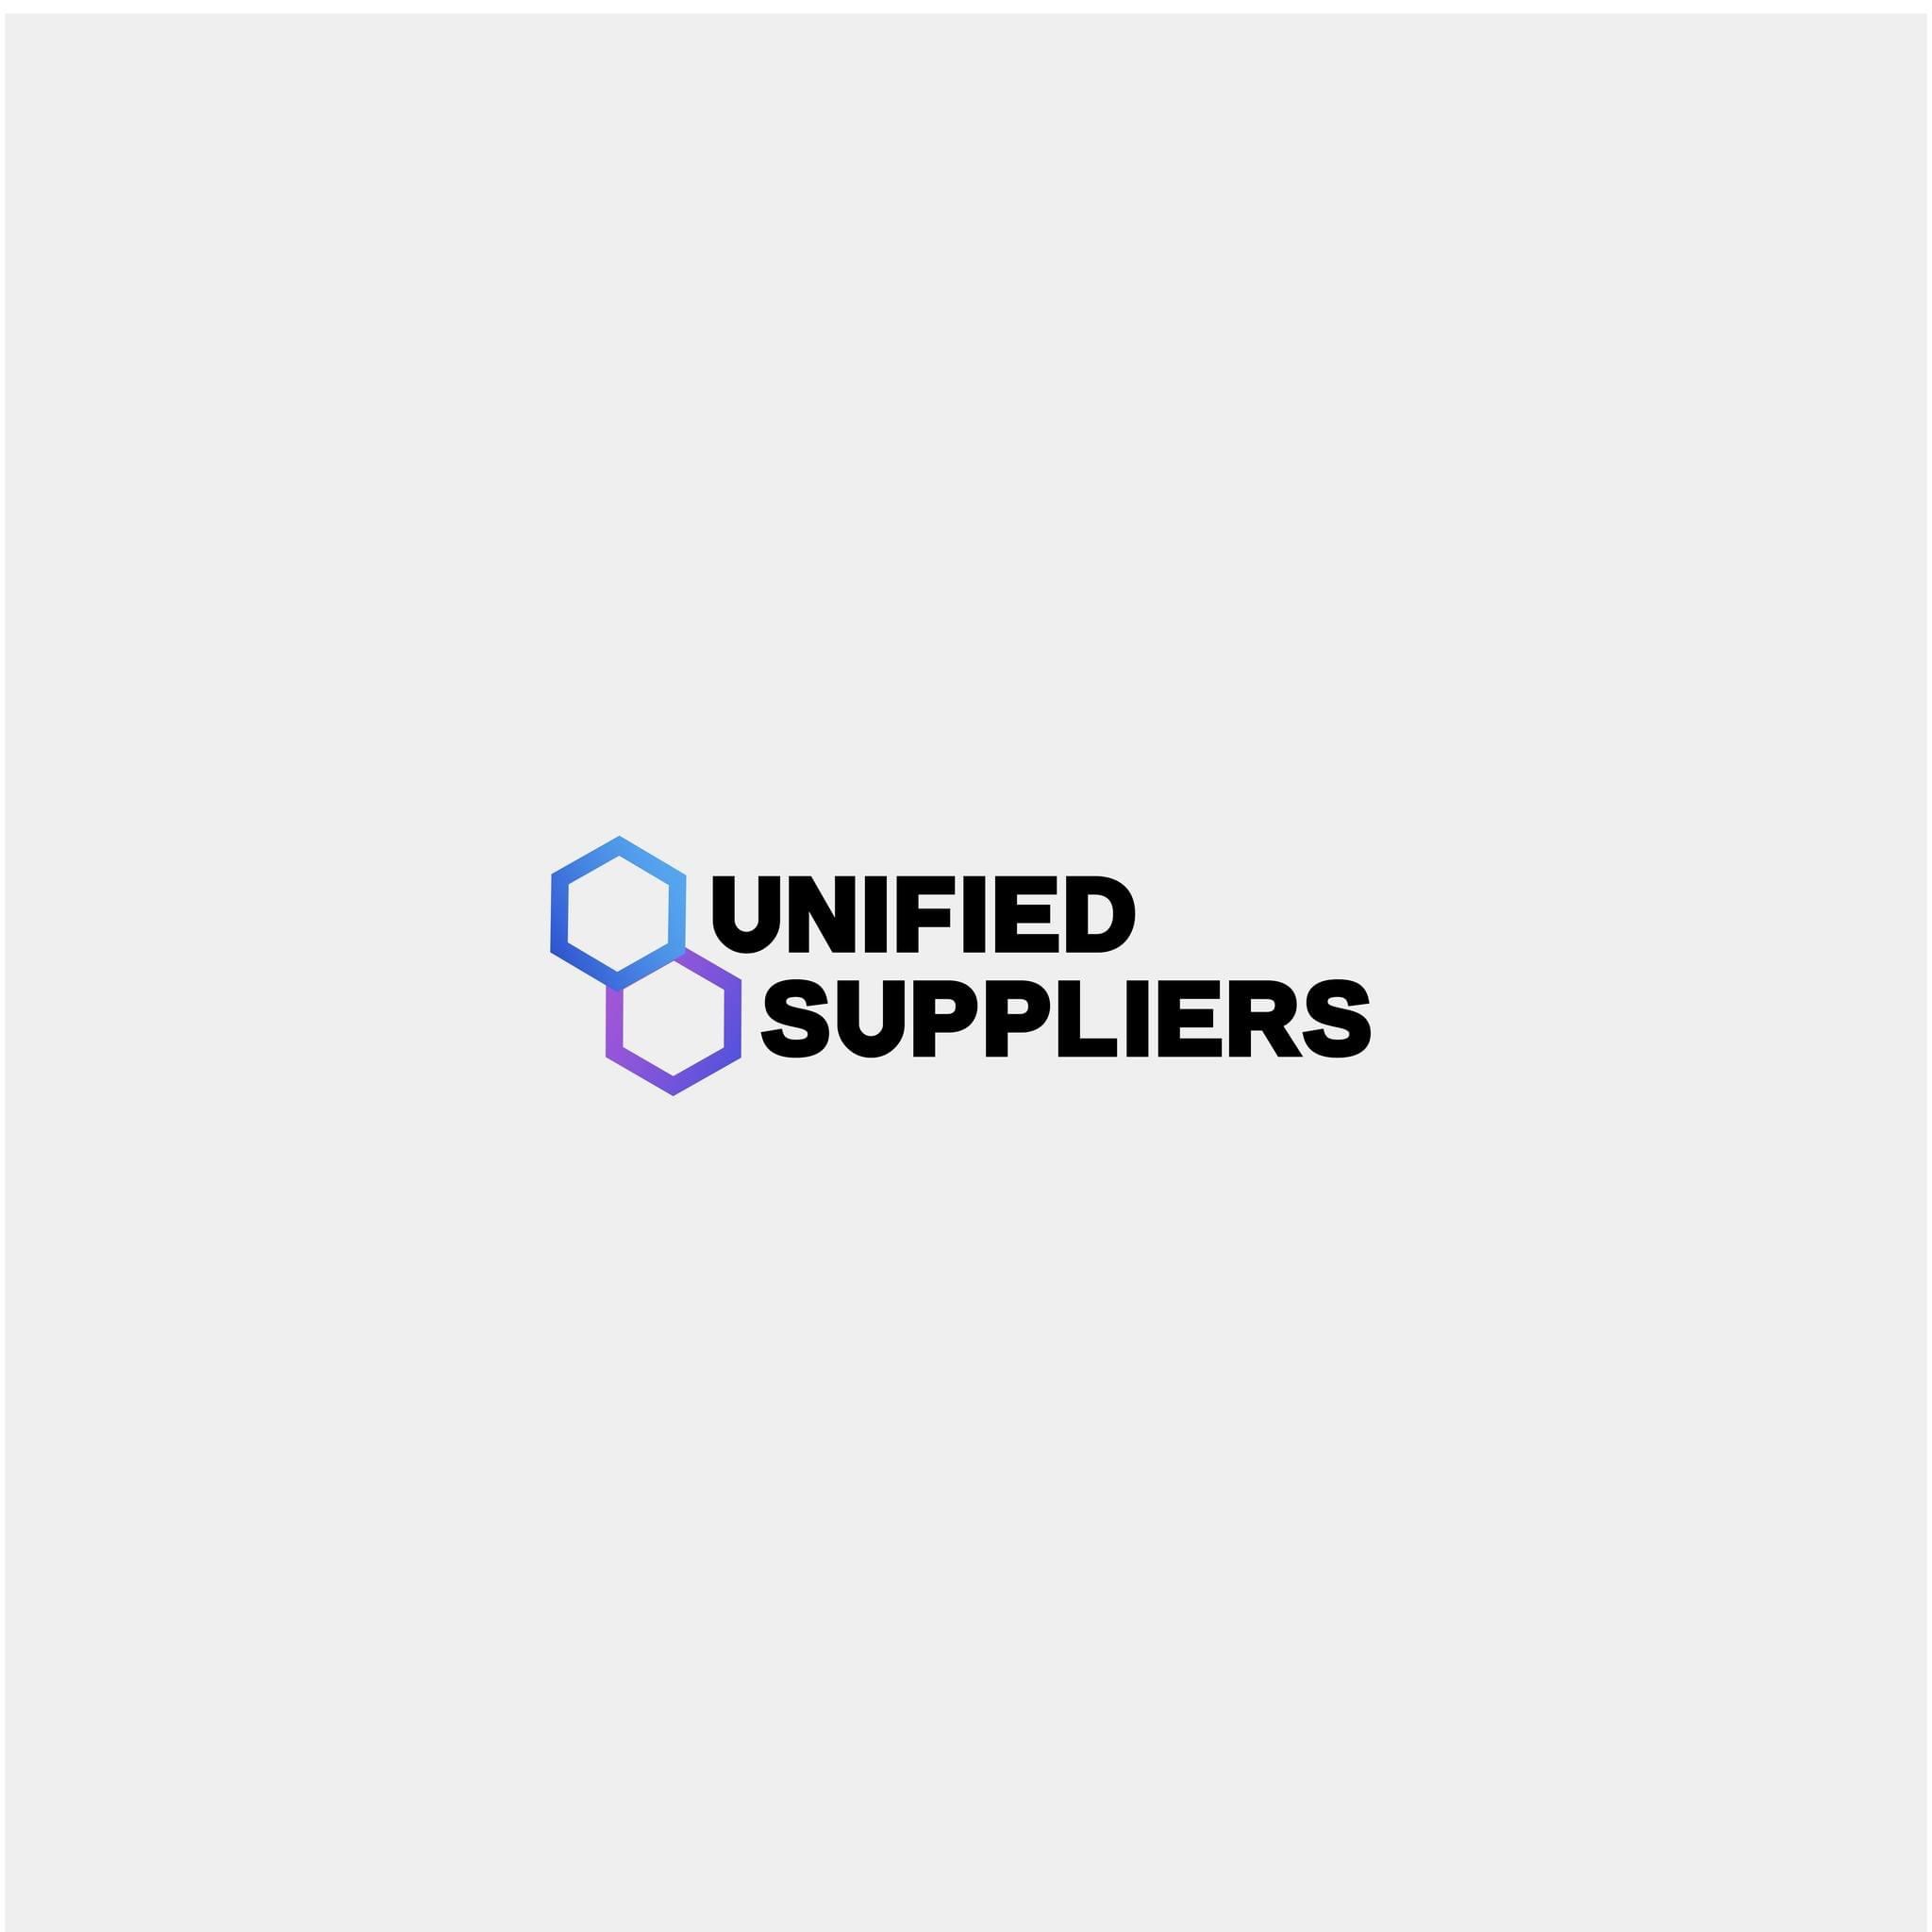 Unified-suppliers Logo